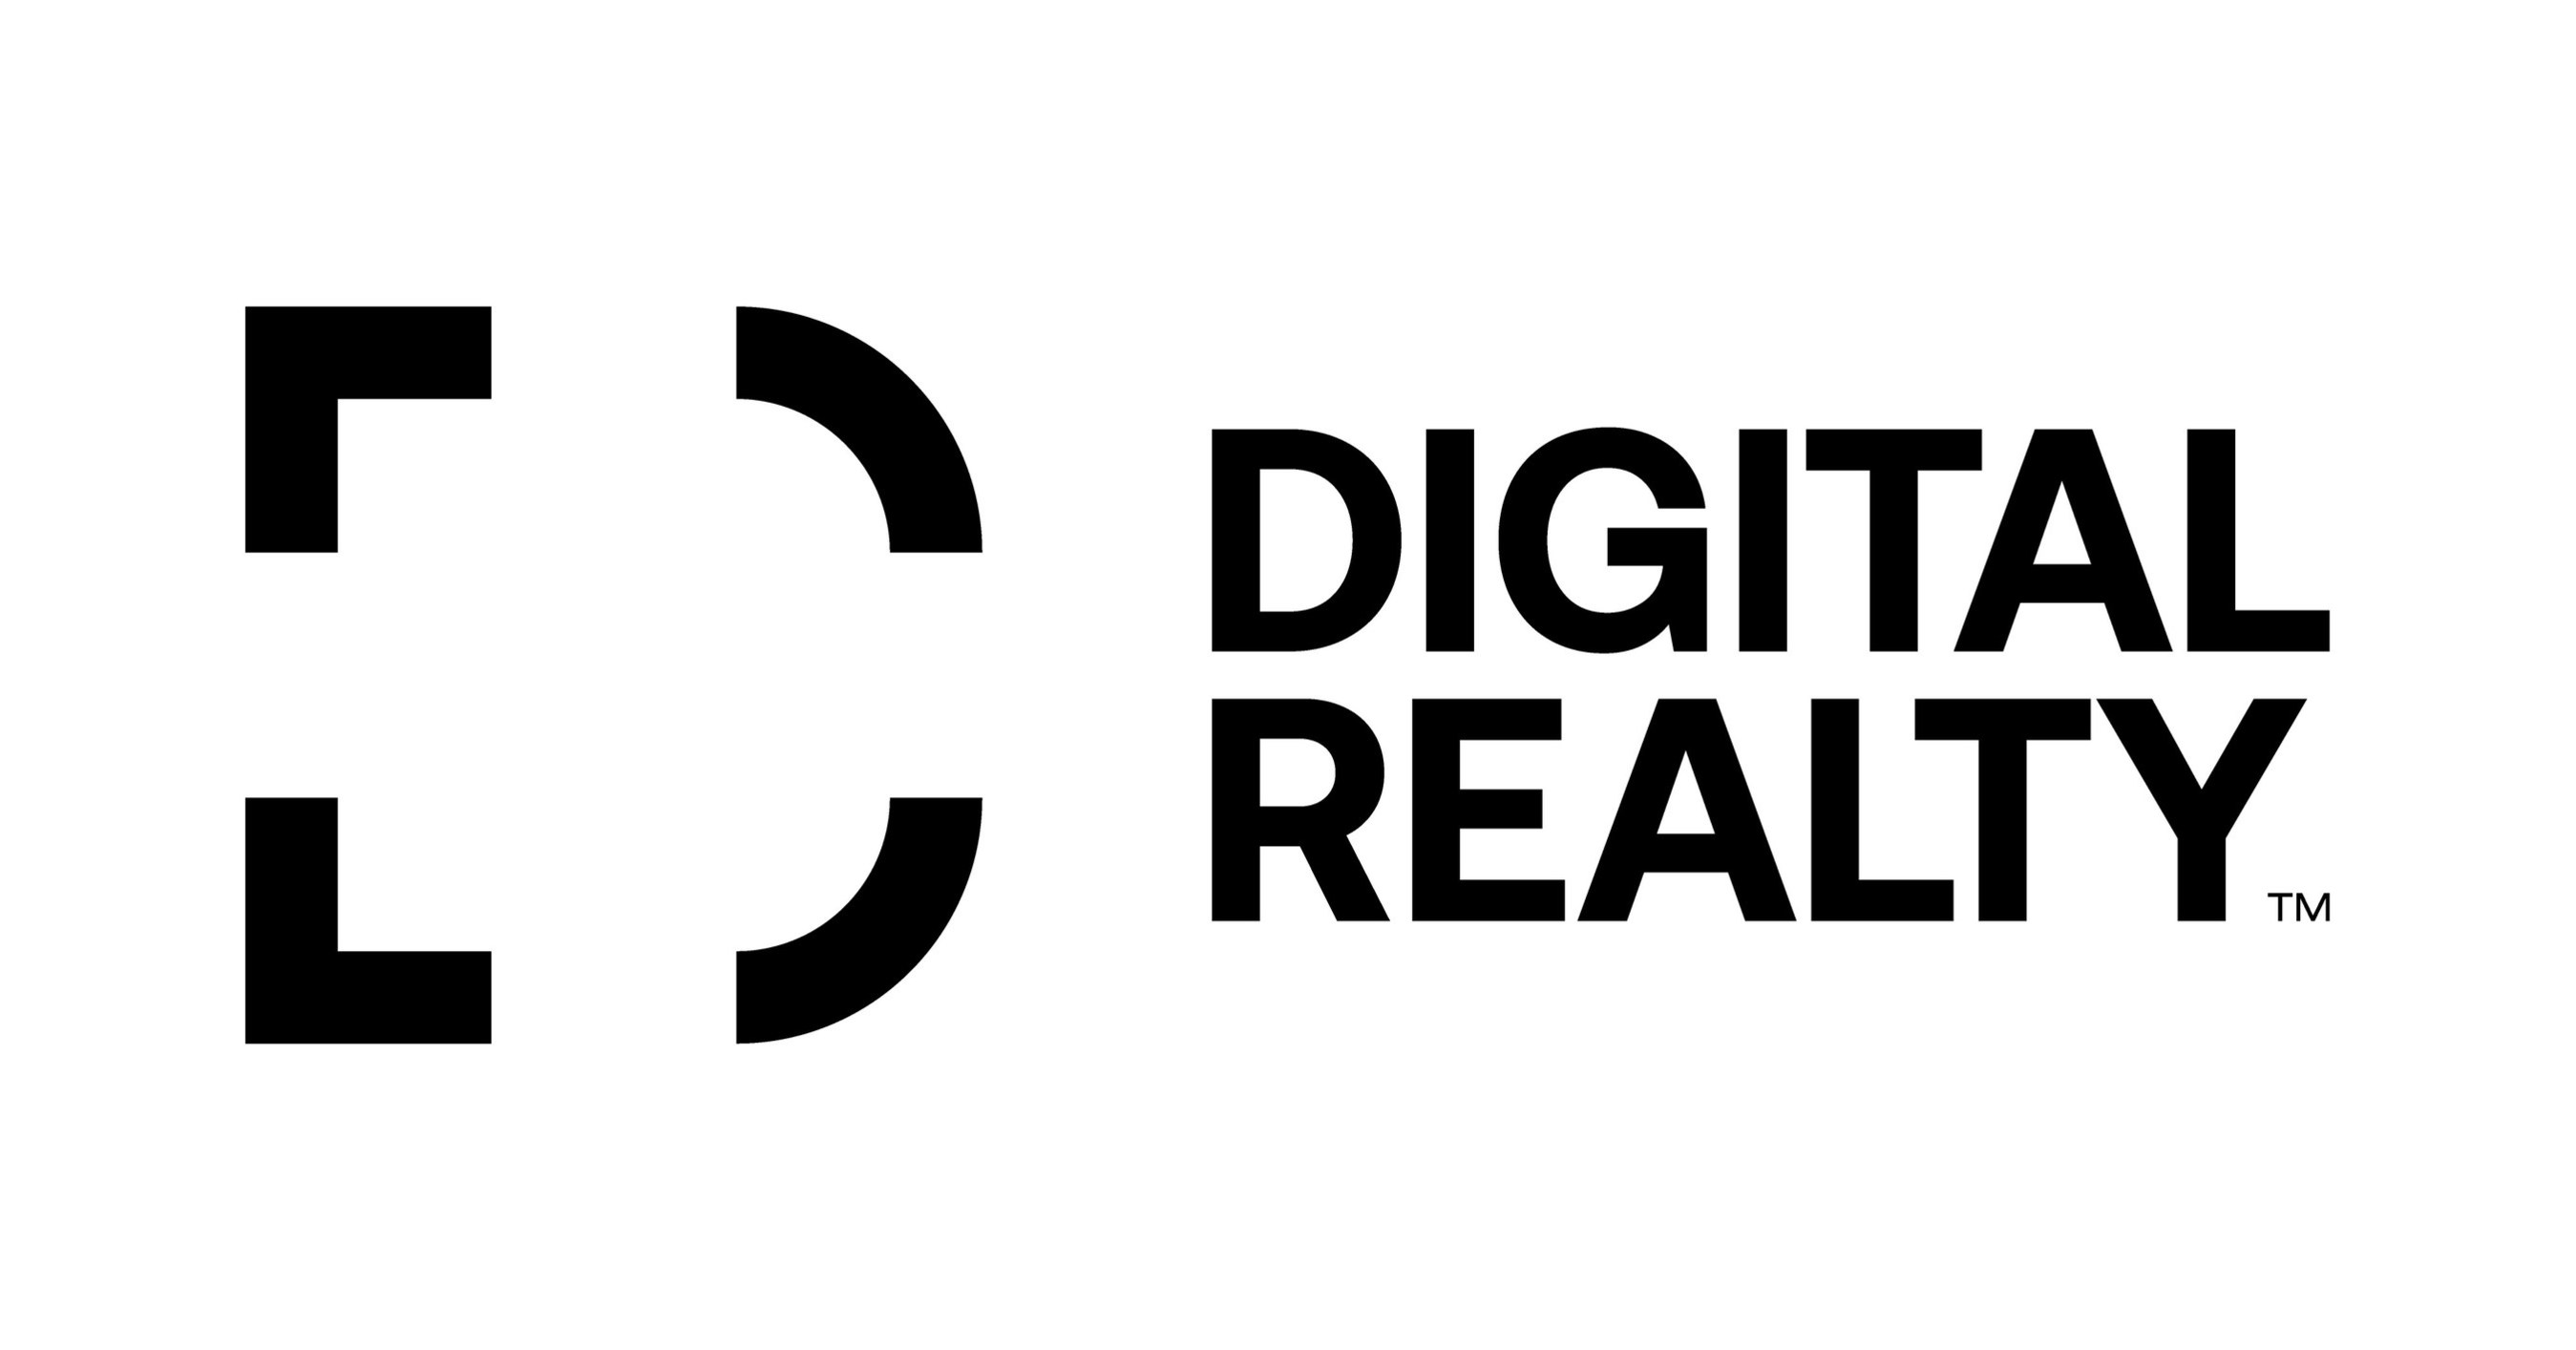 Digital Realty Announces Tax Treatment of 2022 Dividends